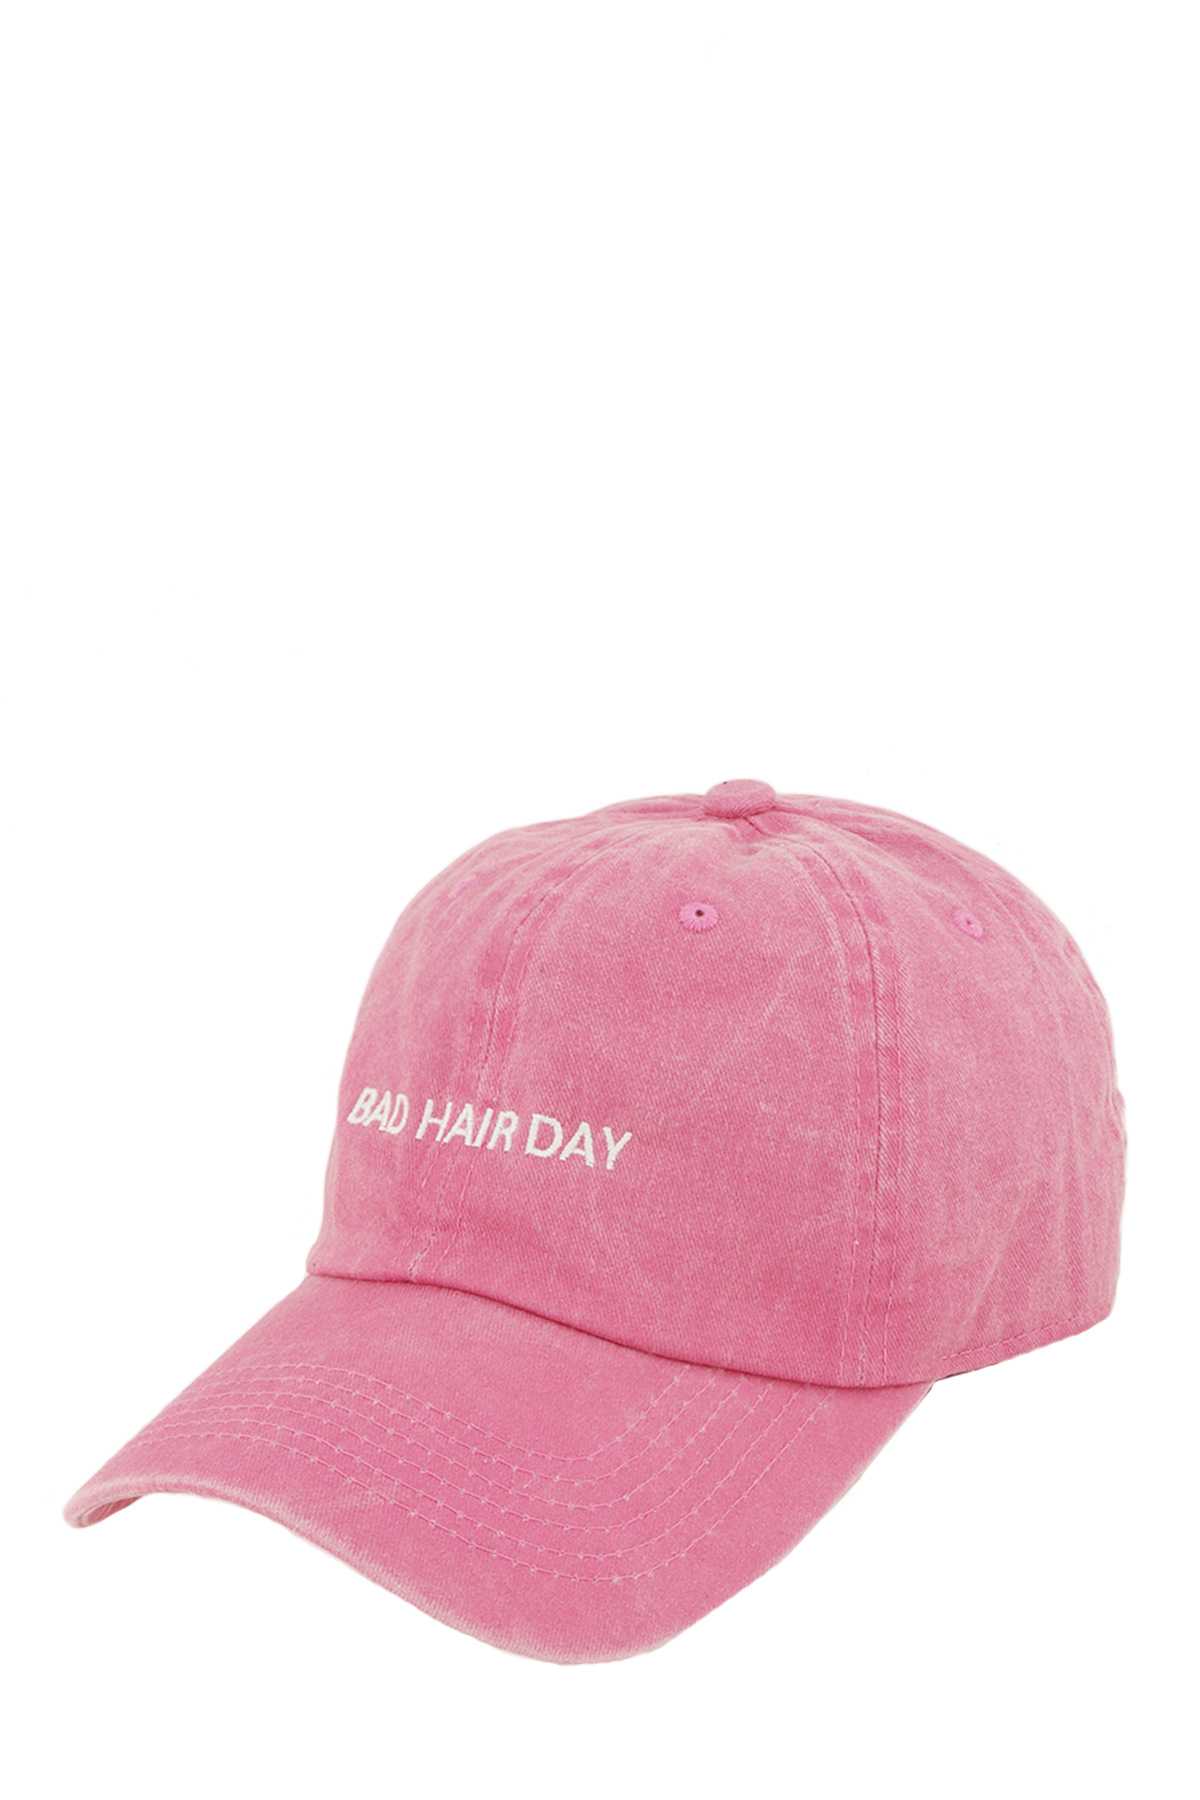 BAD HAIR DAY Embroidered Pigment Baseball Cap